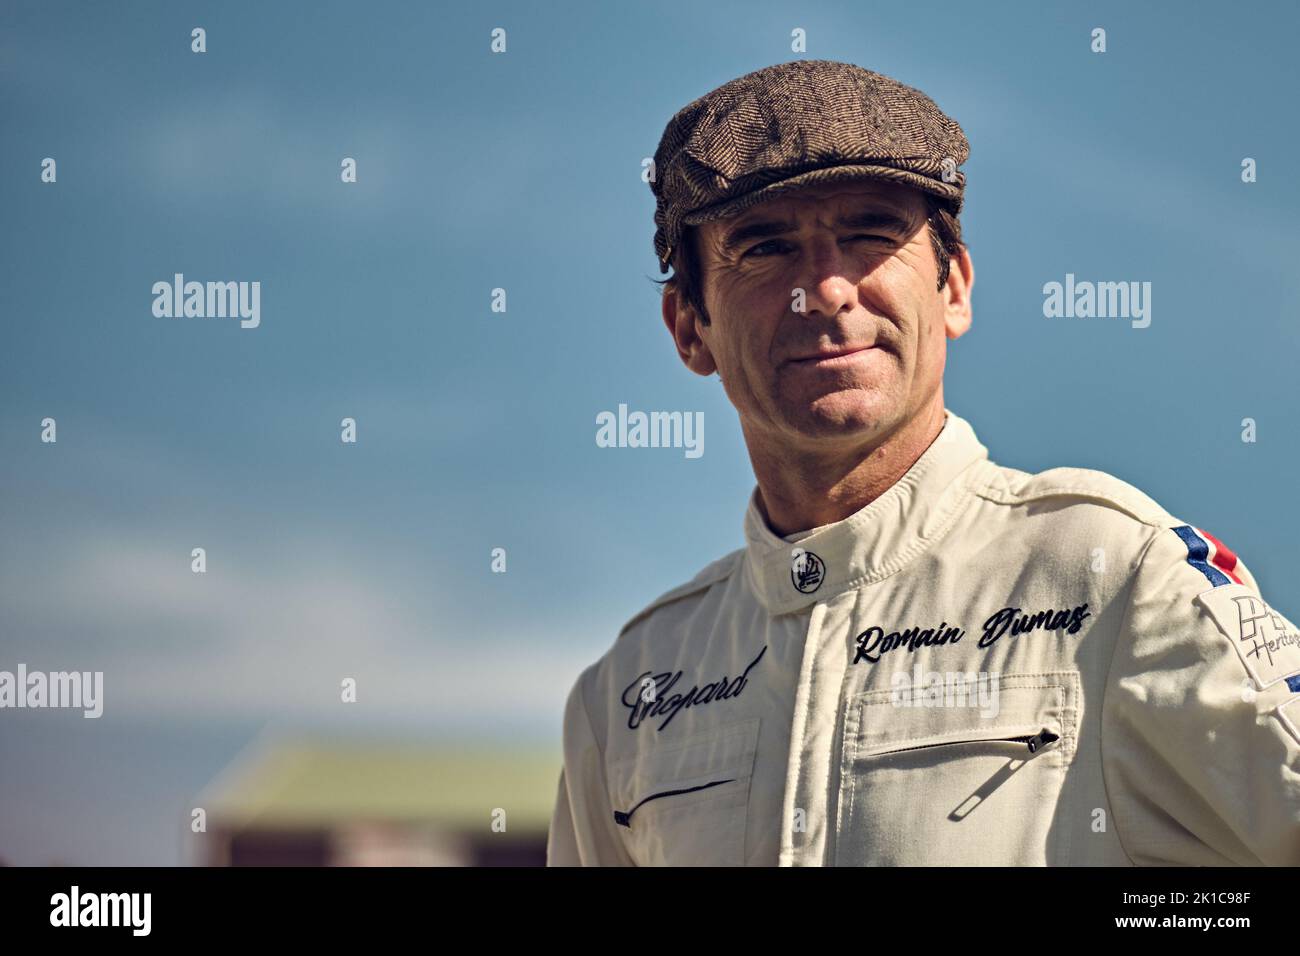 Goodwood, Chichester, UK. 17th Sept, 2022. Romain Dumas during the 2022 Goodwood Revival (Photo by Gergo Toth / Alamy Live News) Stock Photo